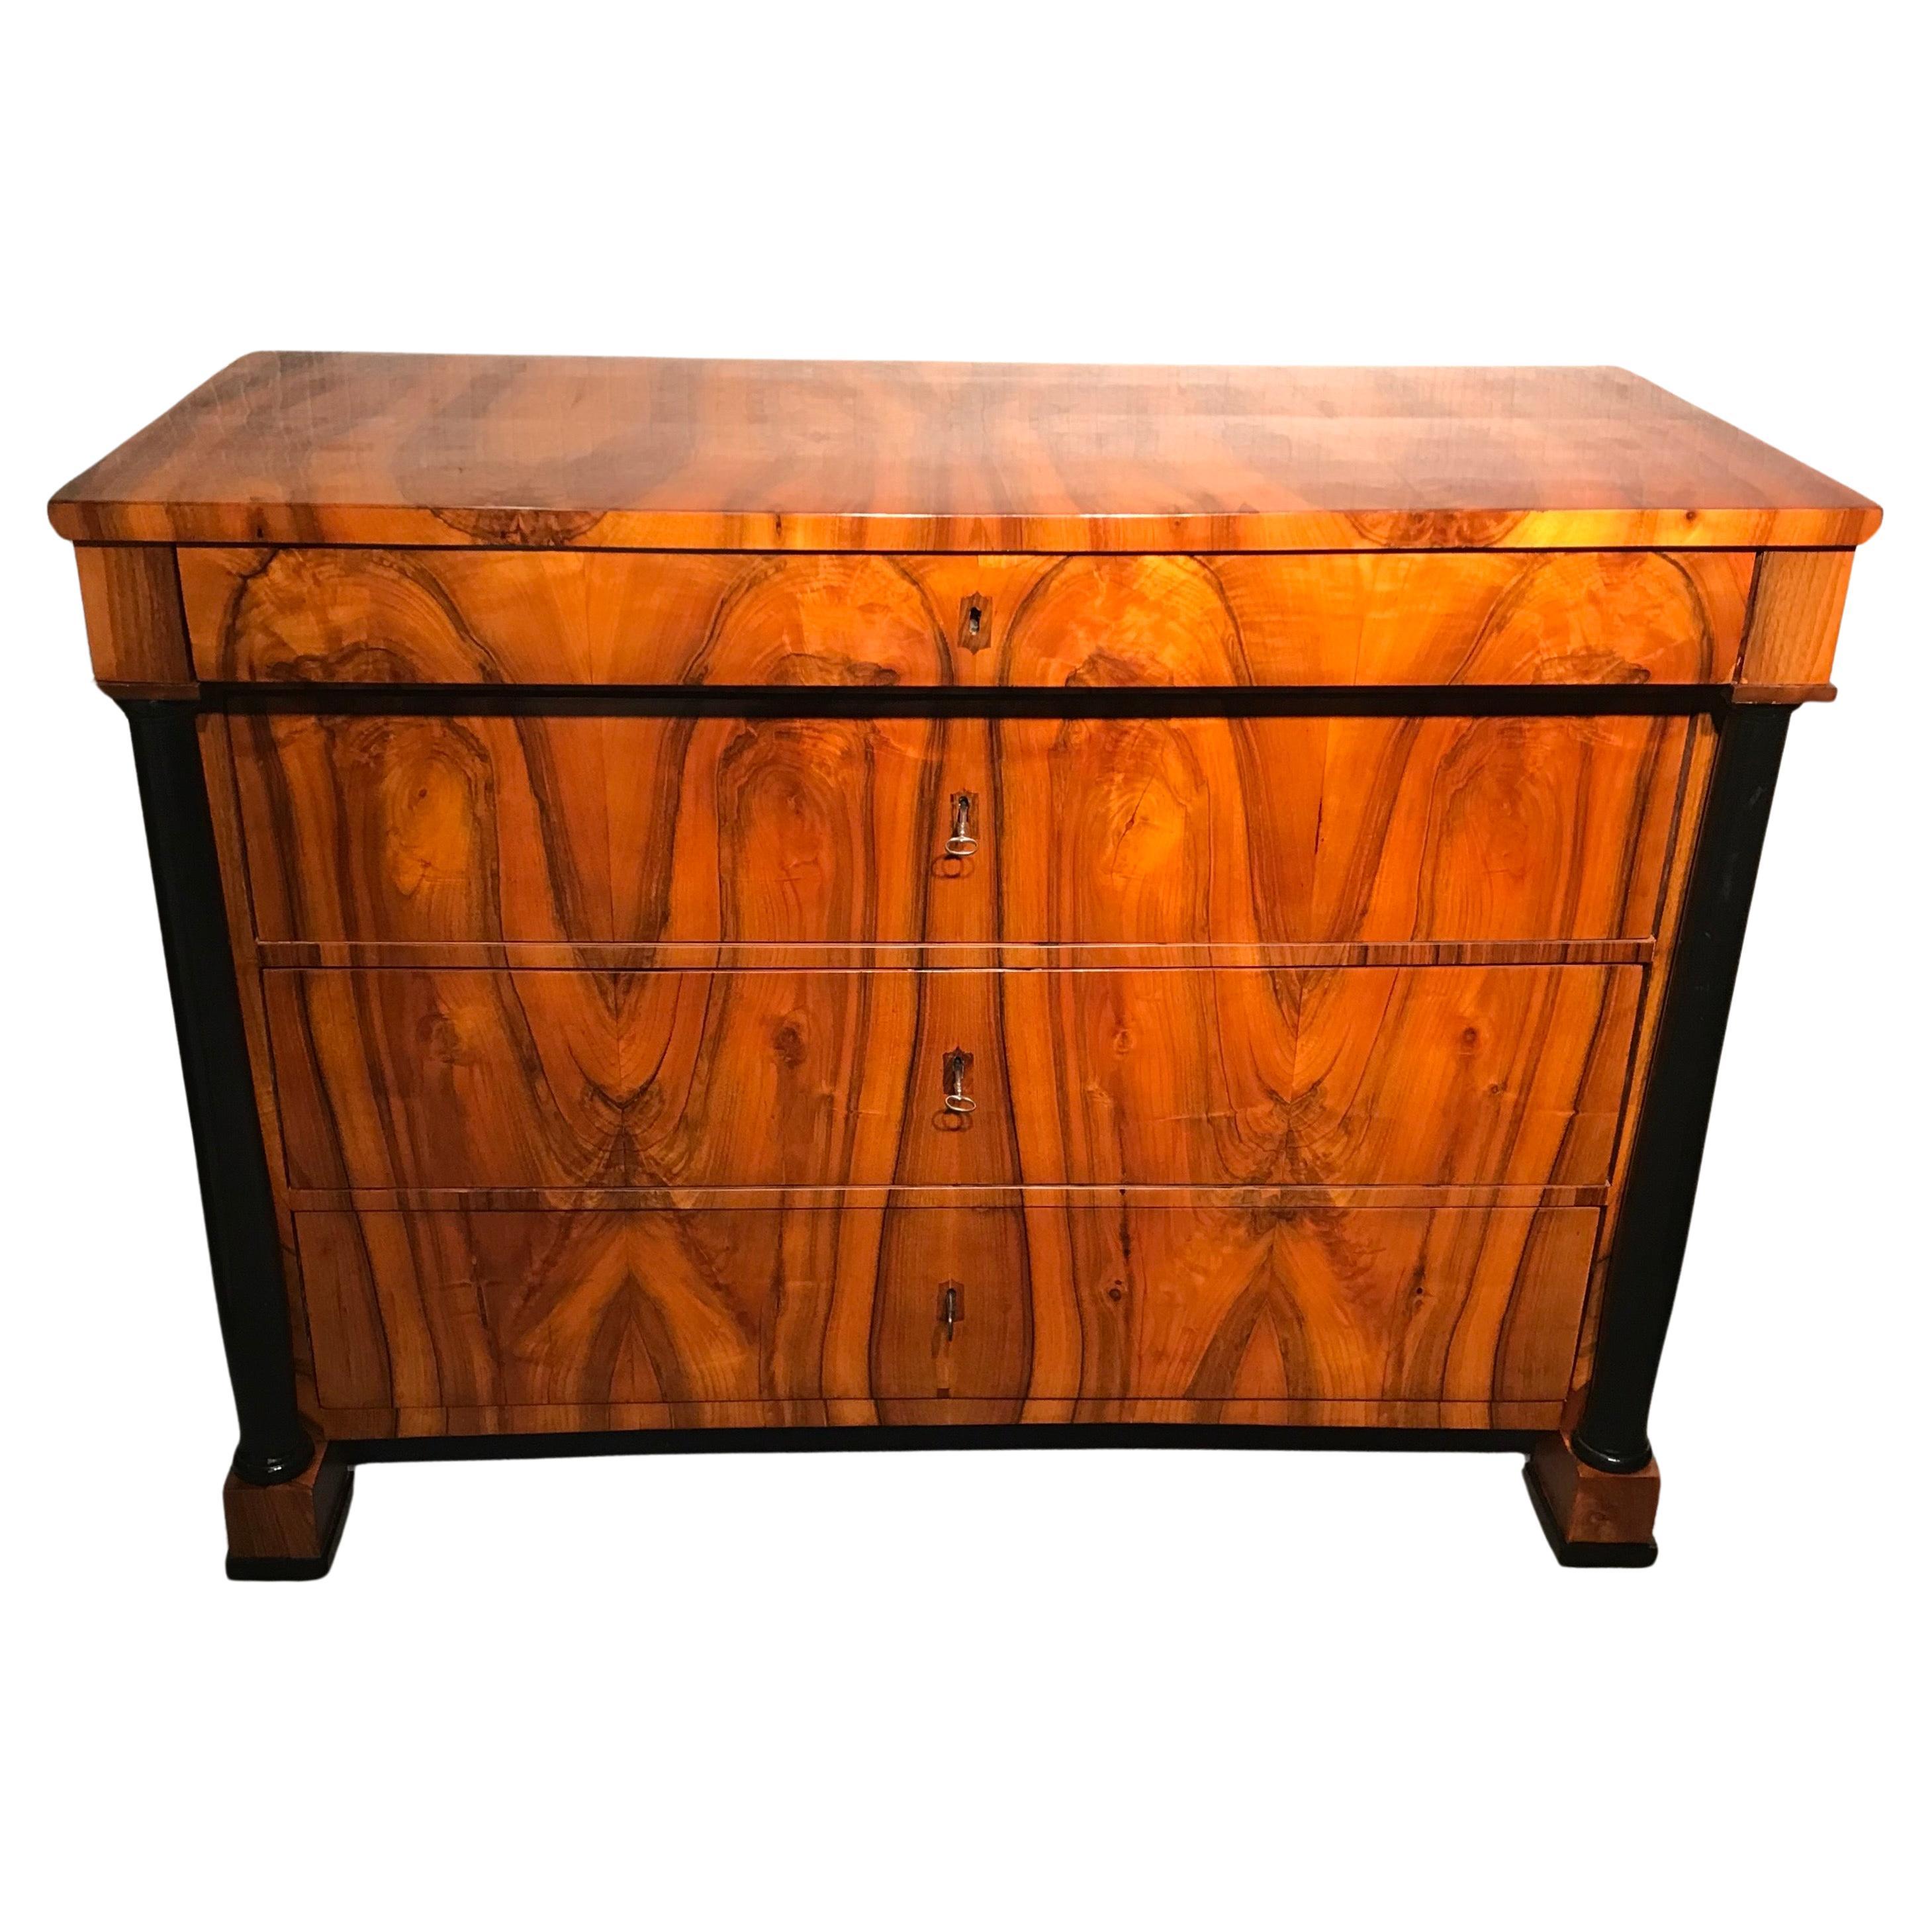 Exquisite Biedermeier Chest of Drawers from 1820, Southern Germany

This remarkable Biedermeier chest of drawers, dating back to 1820 and originating from Southern Germany, is a true testament to craftsmanship and timeless beauty.

Standing on four